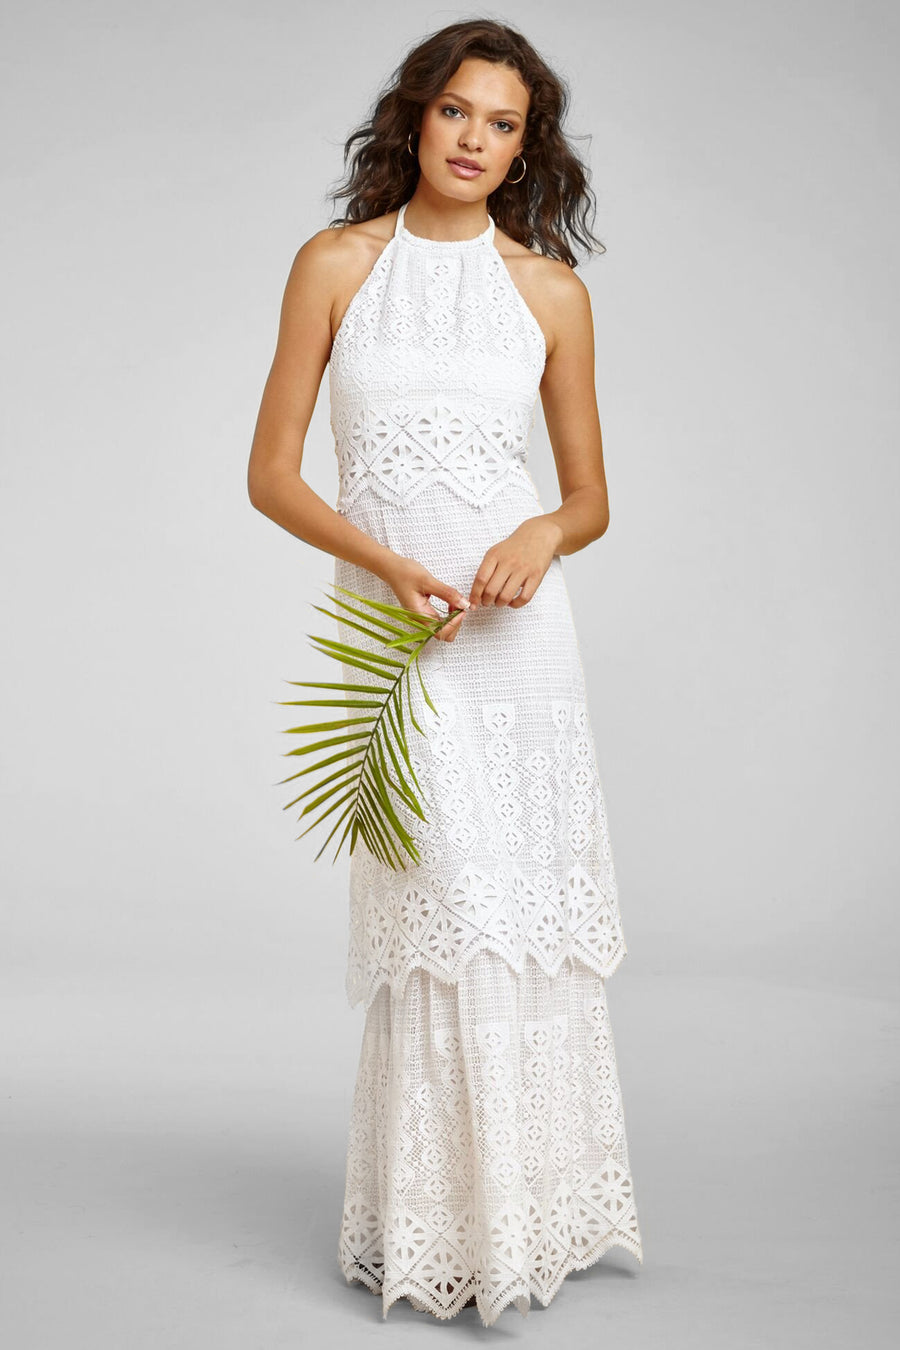 This is a photo of a woman wearing a long white halter dress. She holds greenery in her hands.